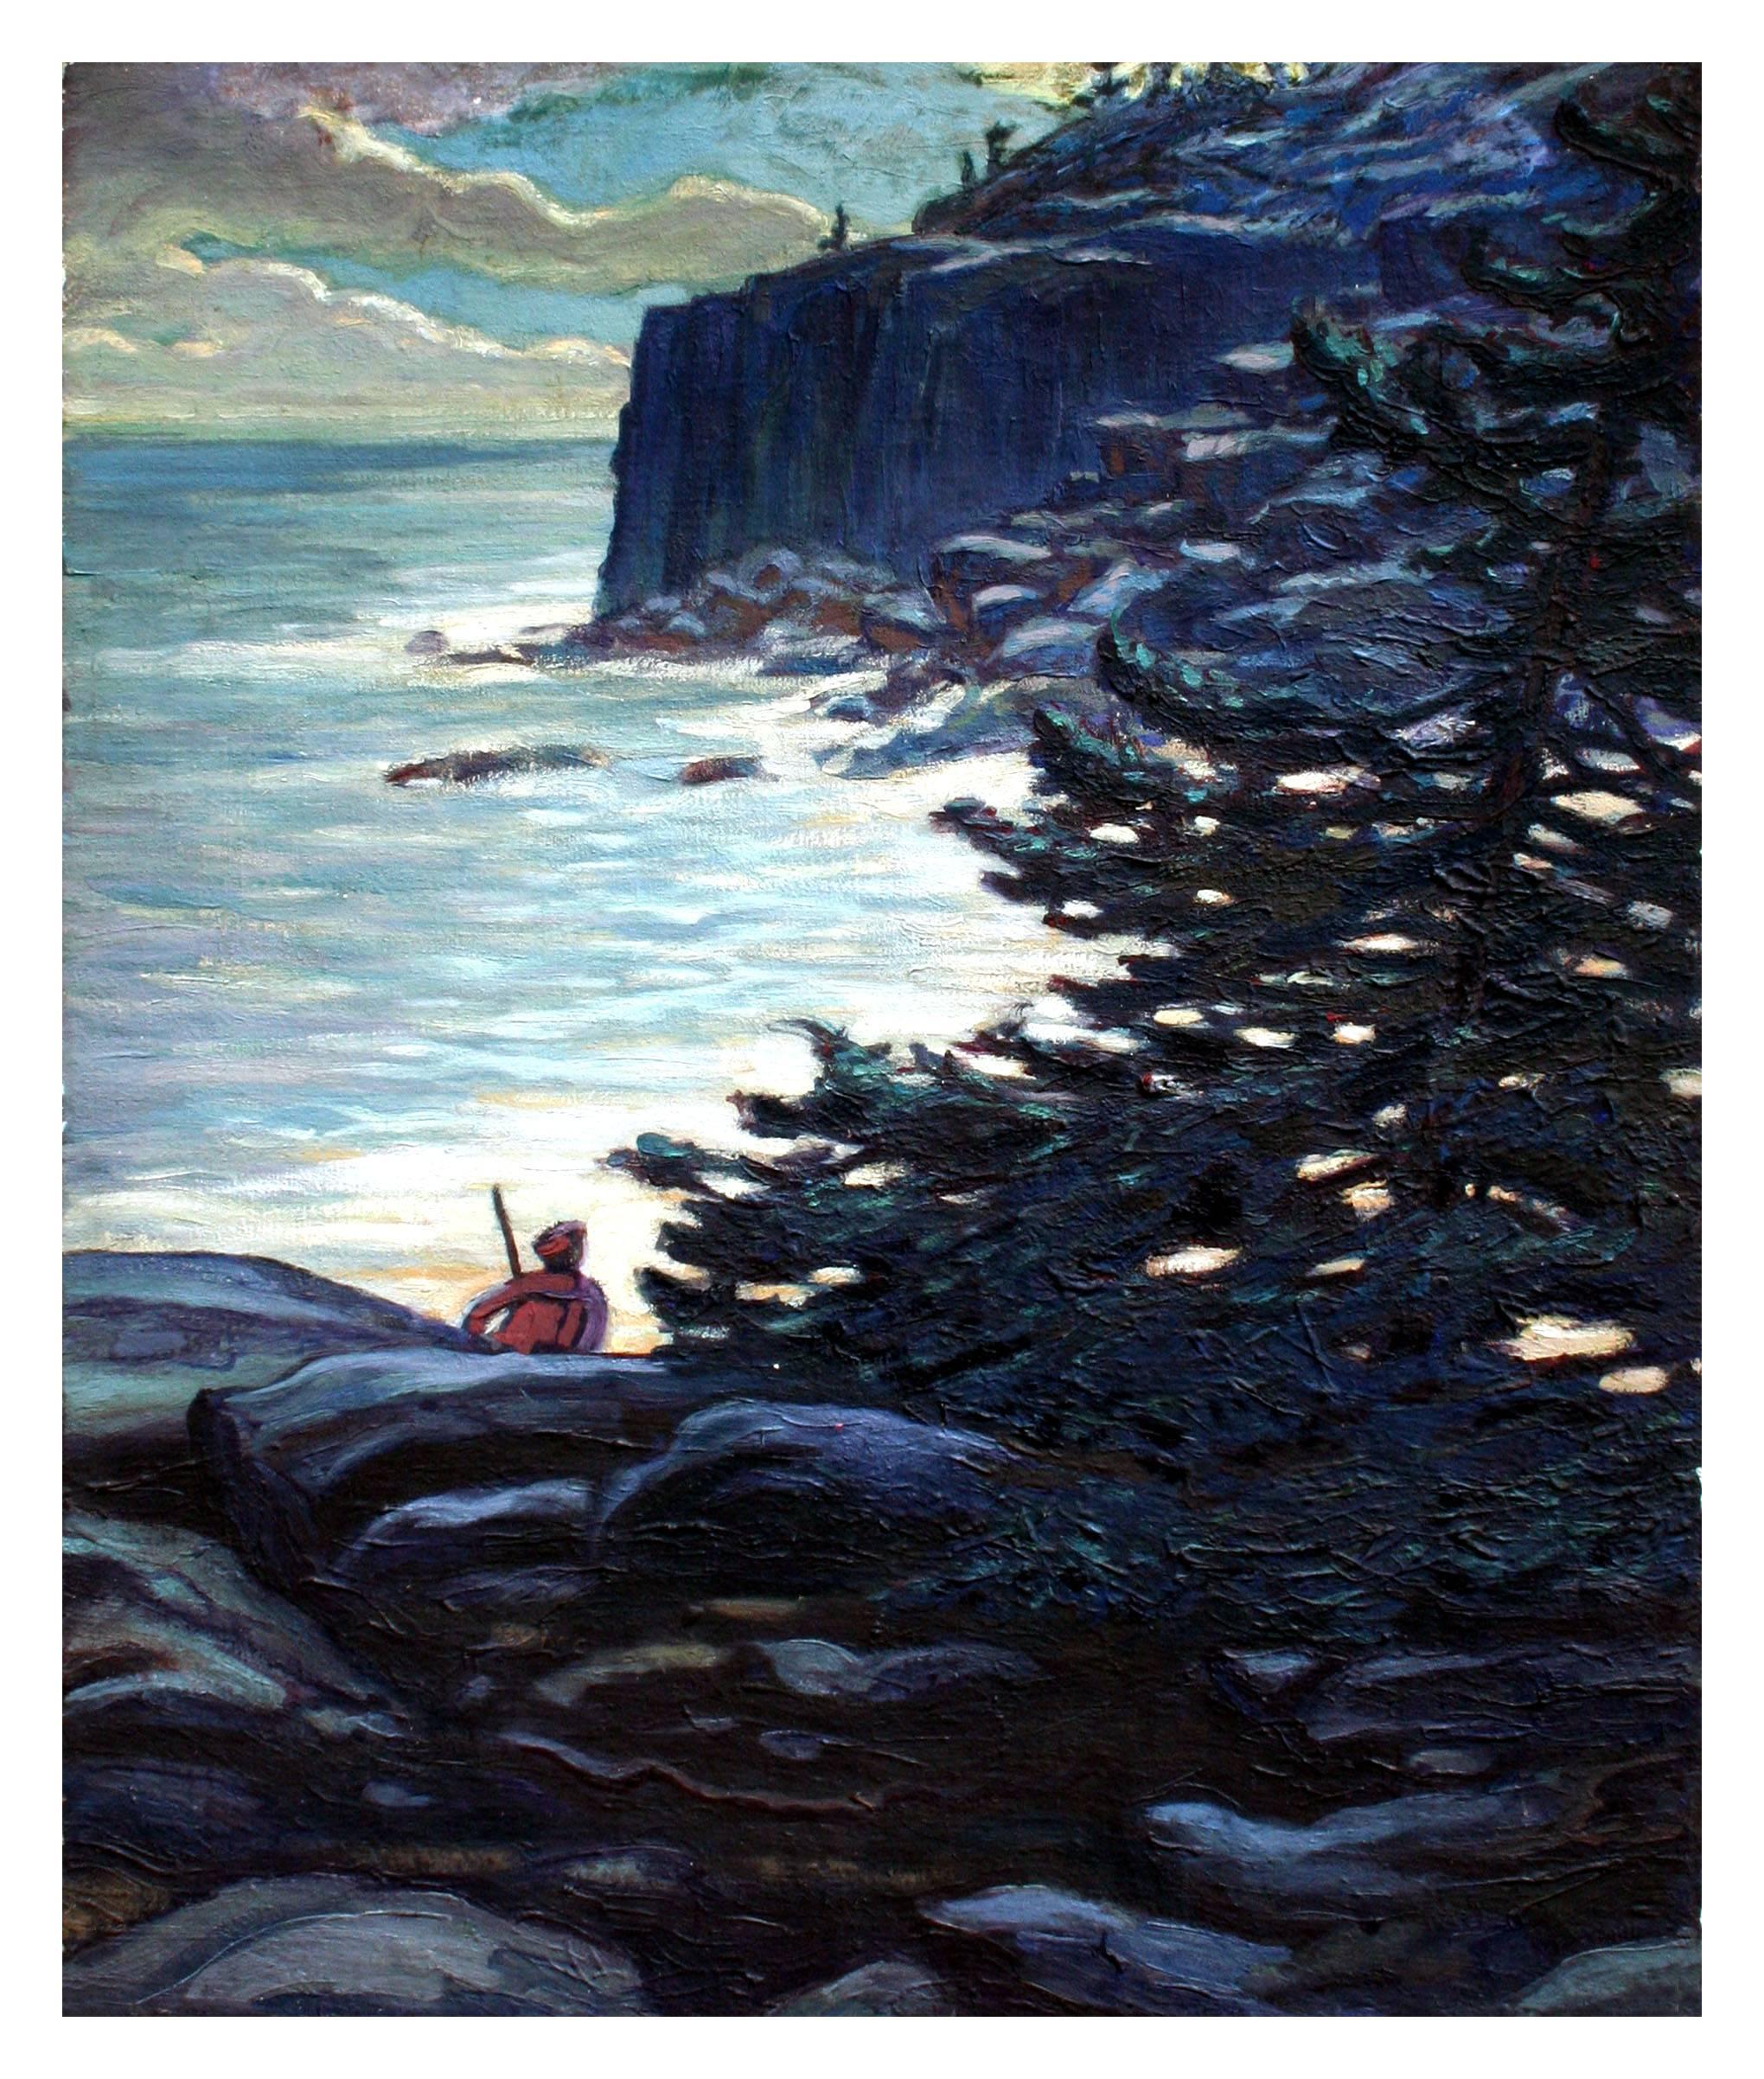 Early 20th Century Nocturnal Coast of Maine - Painting by Frederick K. Detwiller